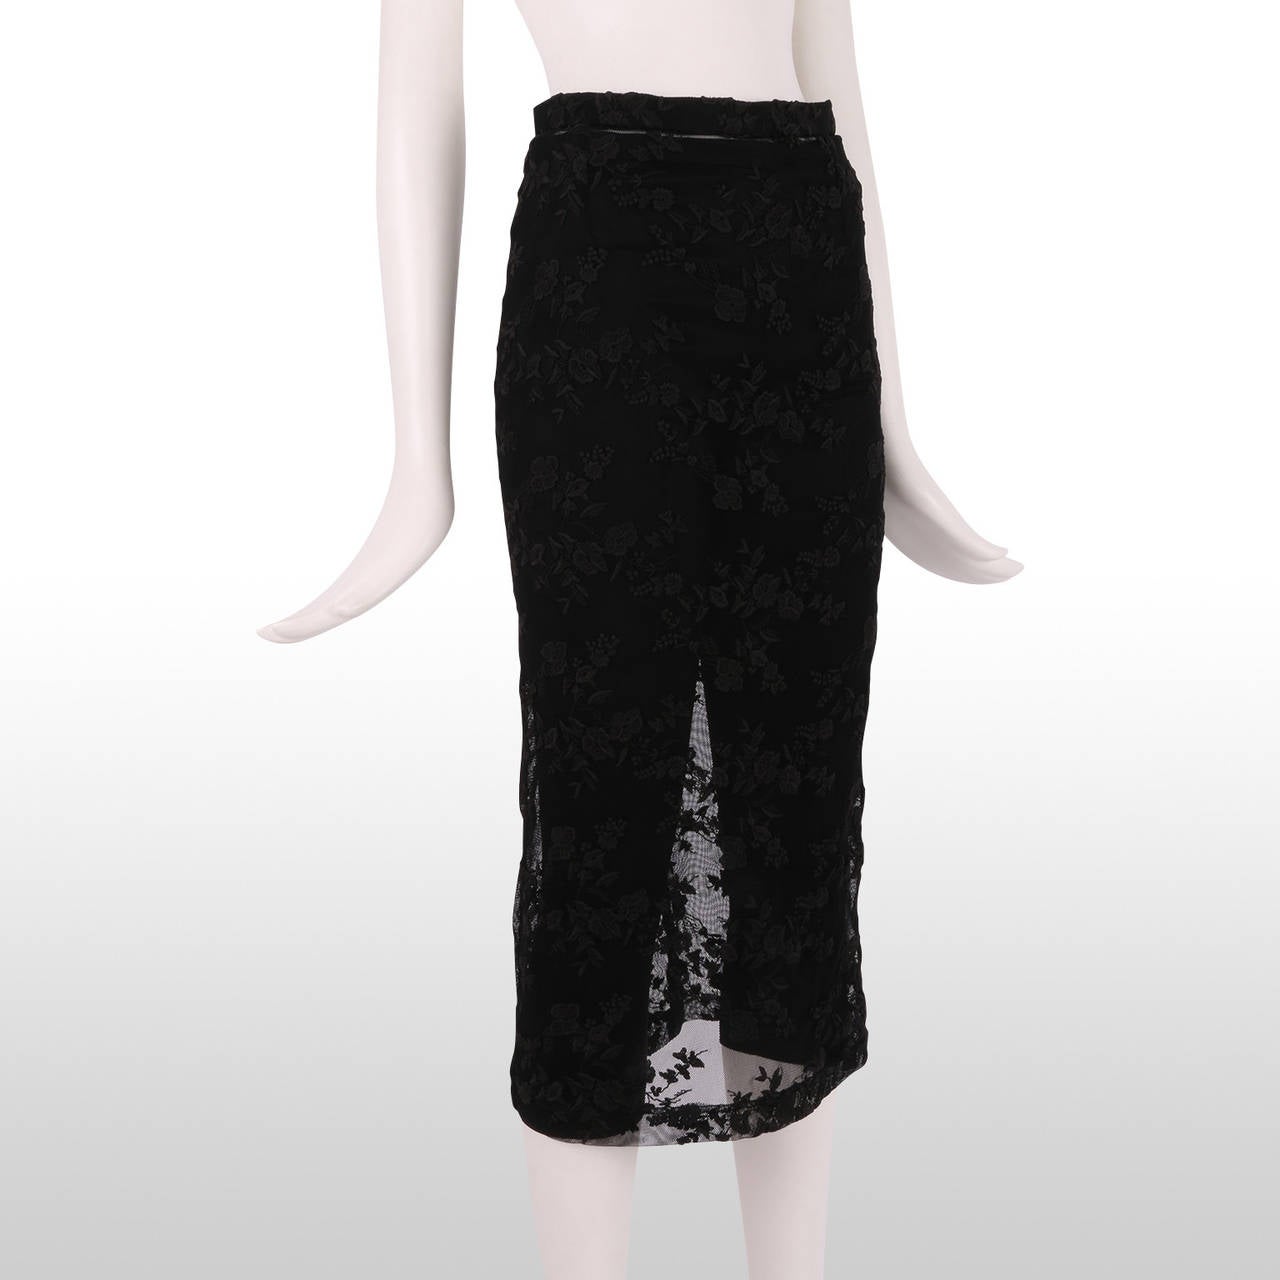 This Dolce and Gabbana Legging-skirt is both elegant and fun. Here the designer plays with the idea of the skirt, the under-skirt is replaced with a chic comfortable legging that shows of your legs. Remains in excellent condition.